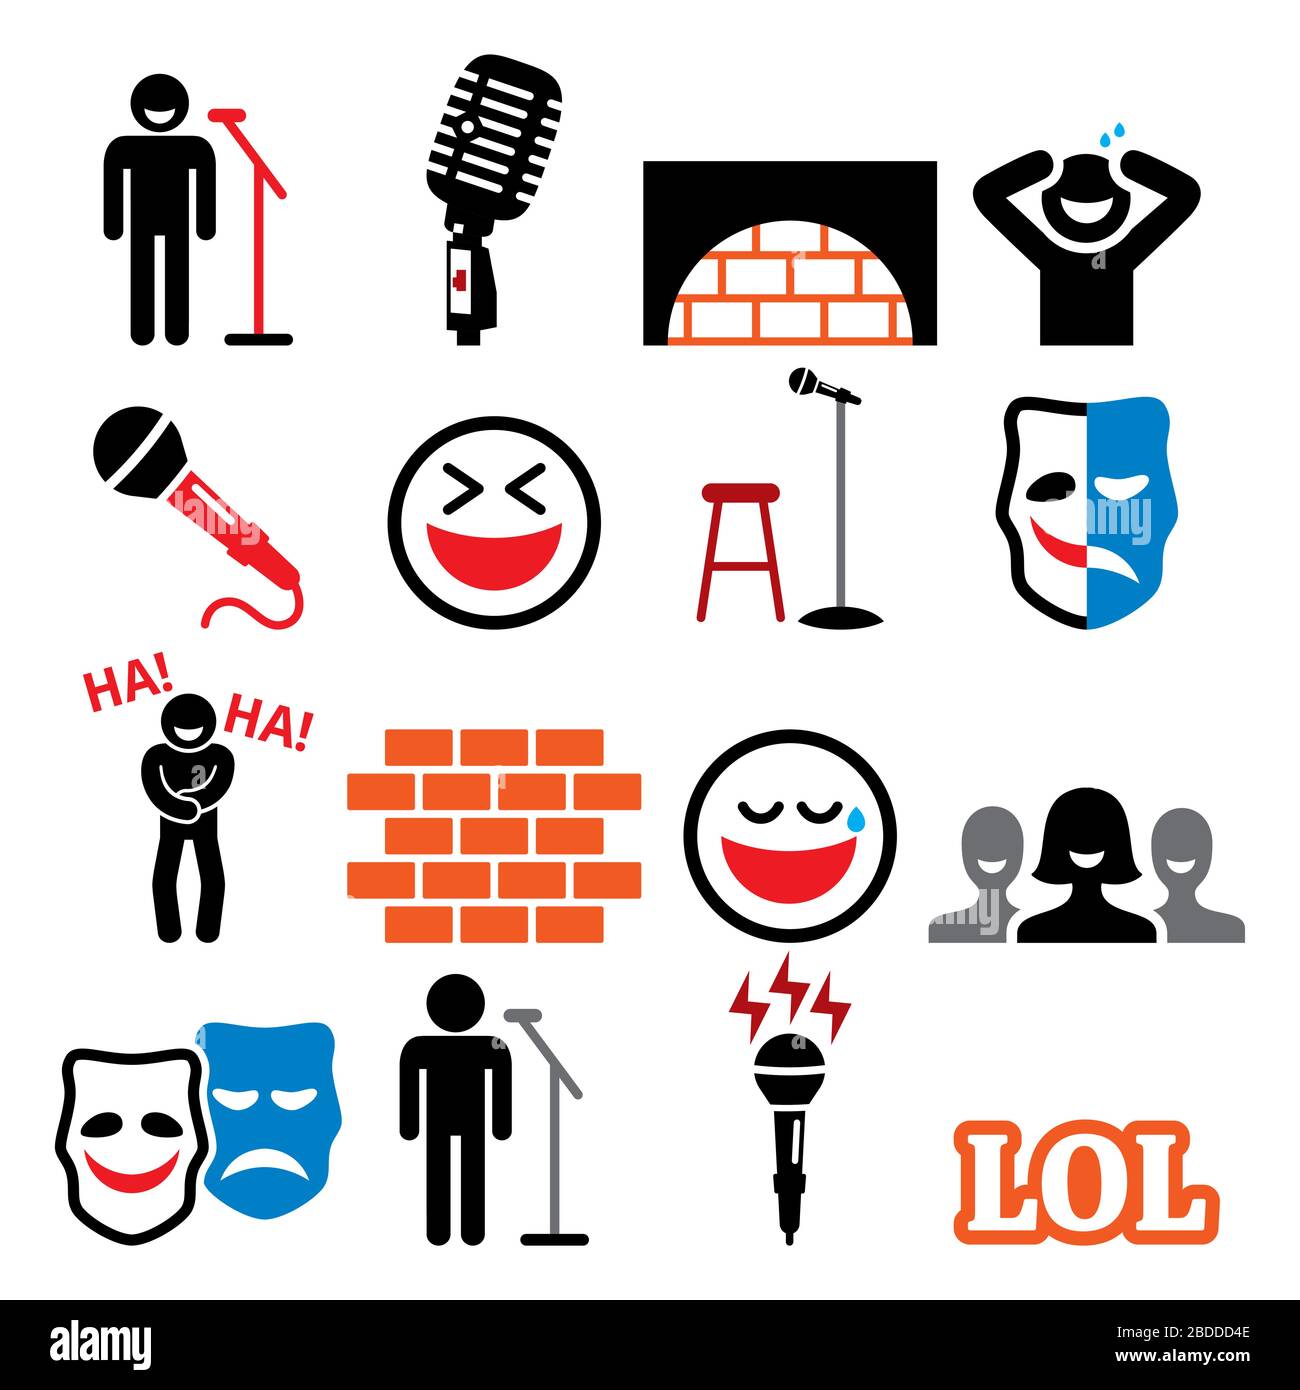 Stand up comedy, entertainment, comedians and people laughing vector icons set Stock Vector